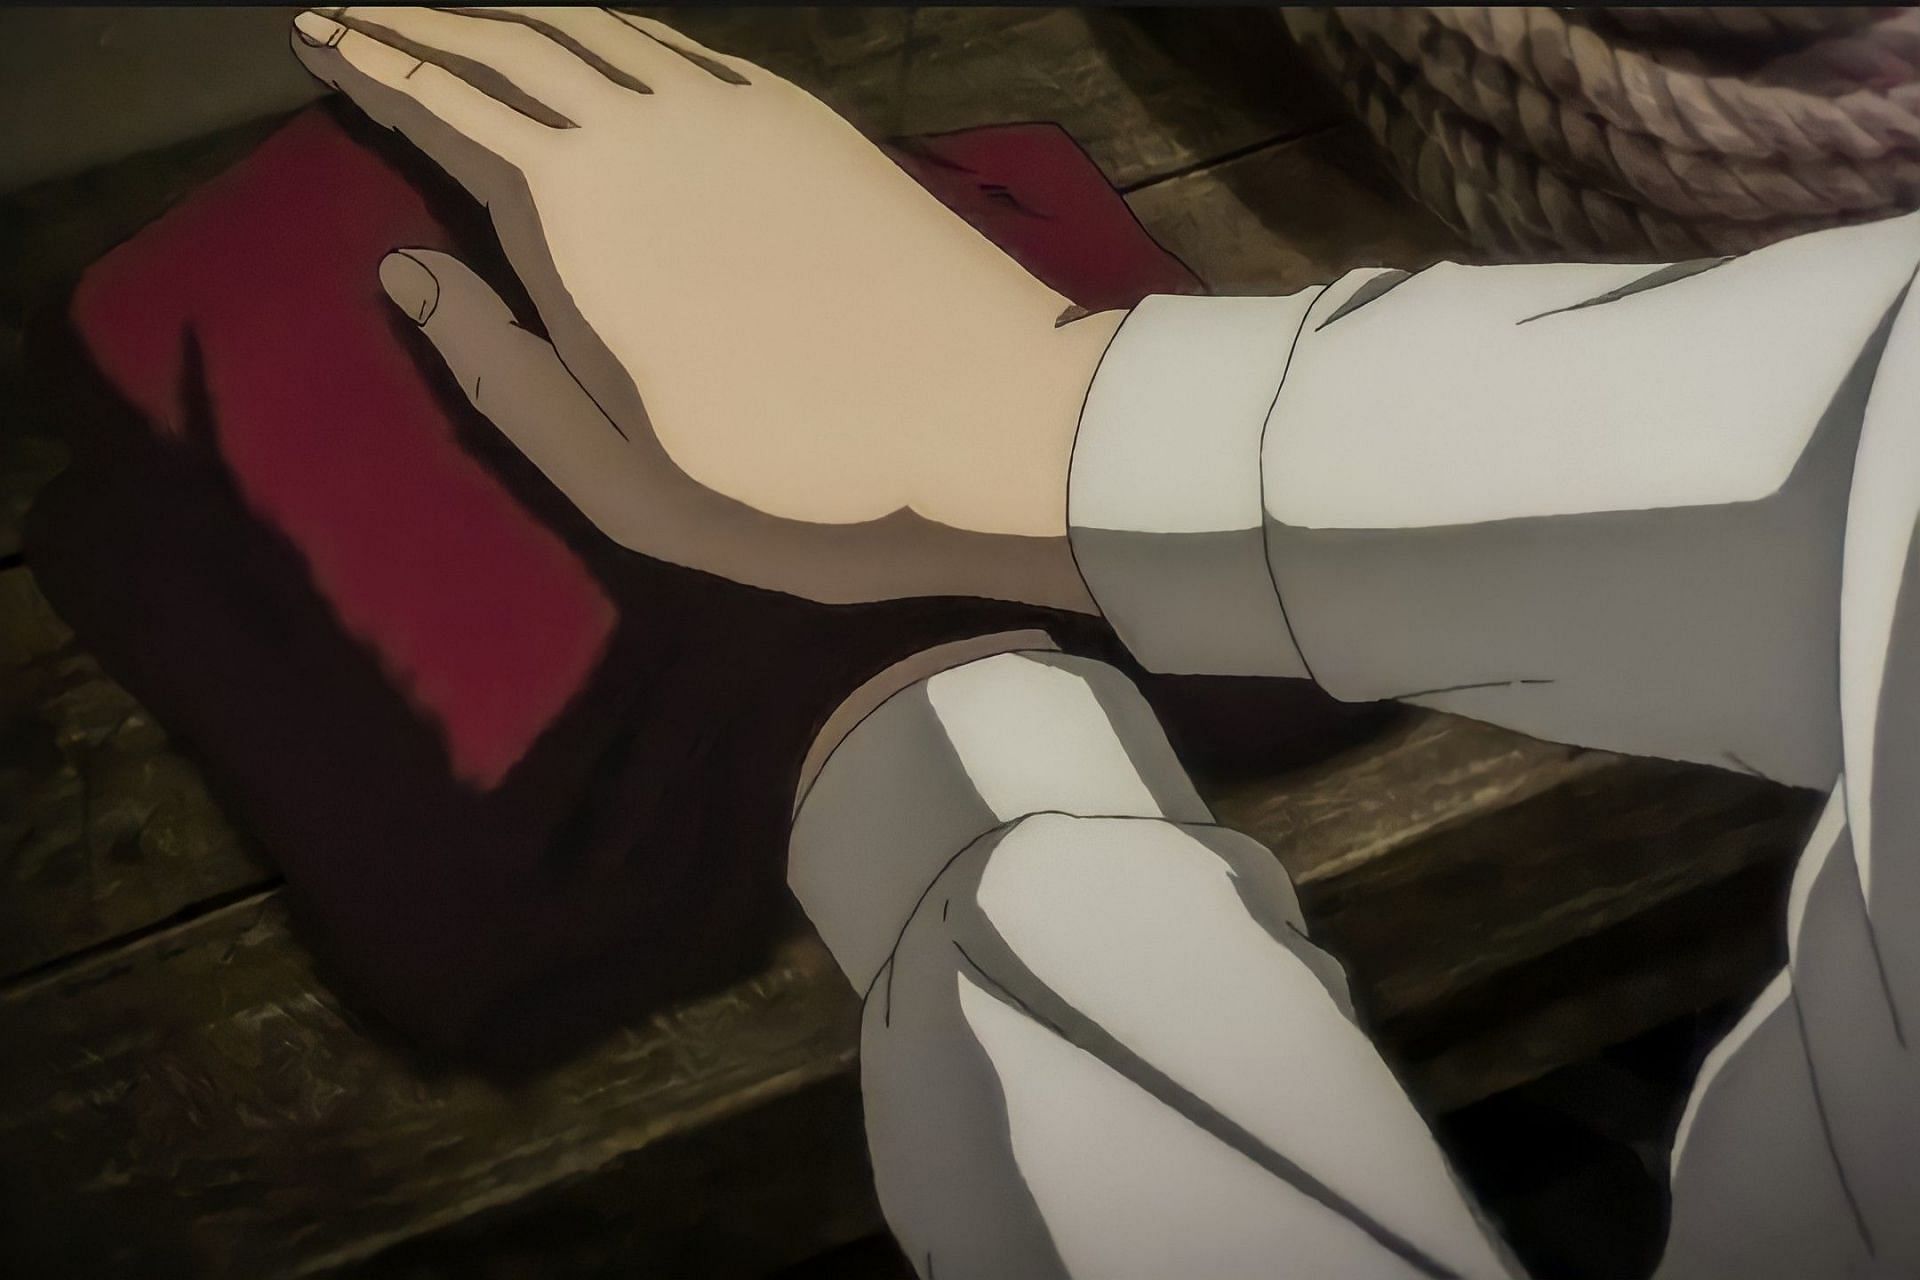 Mikasa leaving her scarf behind in Attack on Titan Season 4 Part 2 Episode 2 (Image via MAPPA)